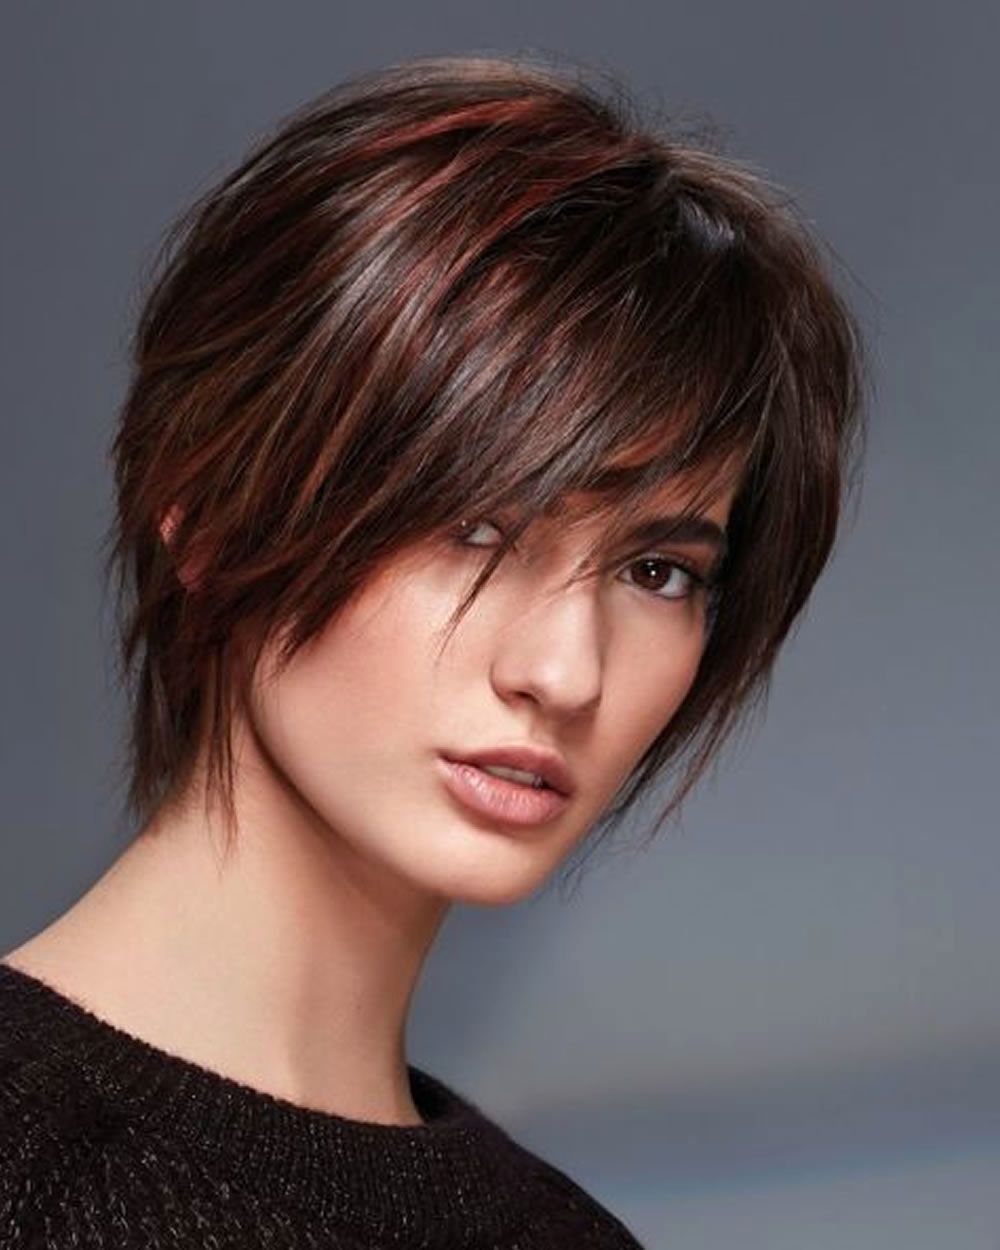 Hairstyles For Oval Faces 2018 Best Short Hairstyles For Oval Faces Regarding Short Hairstyles For Women With Oval Faces (Photo 24 of 25)